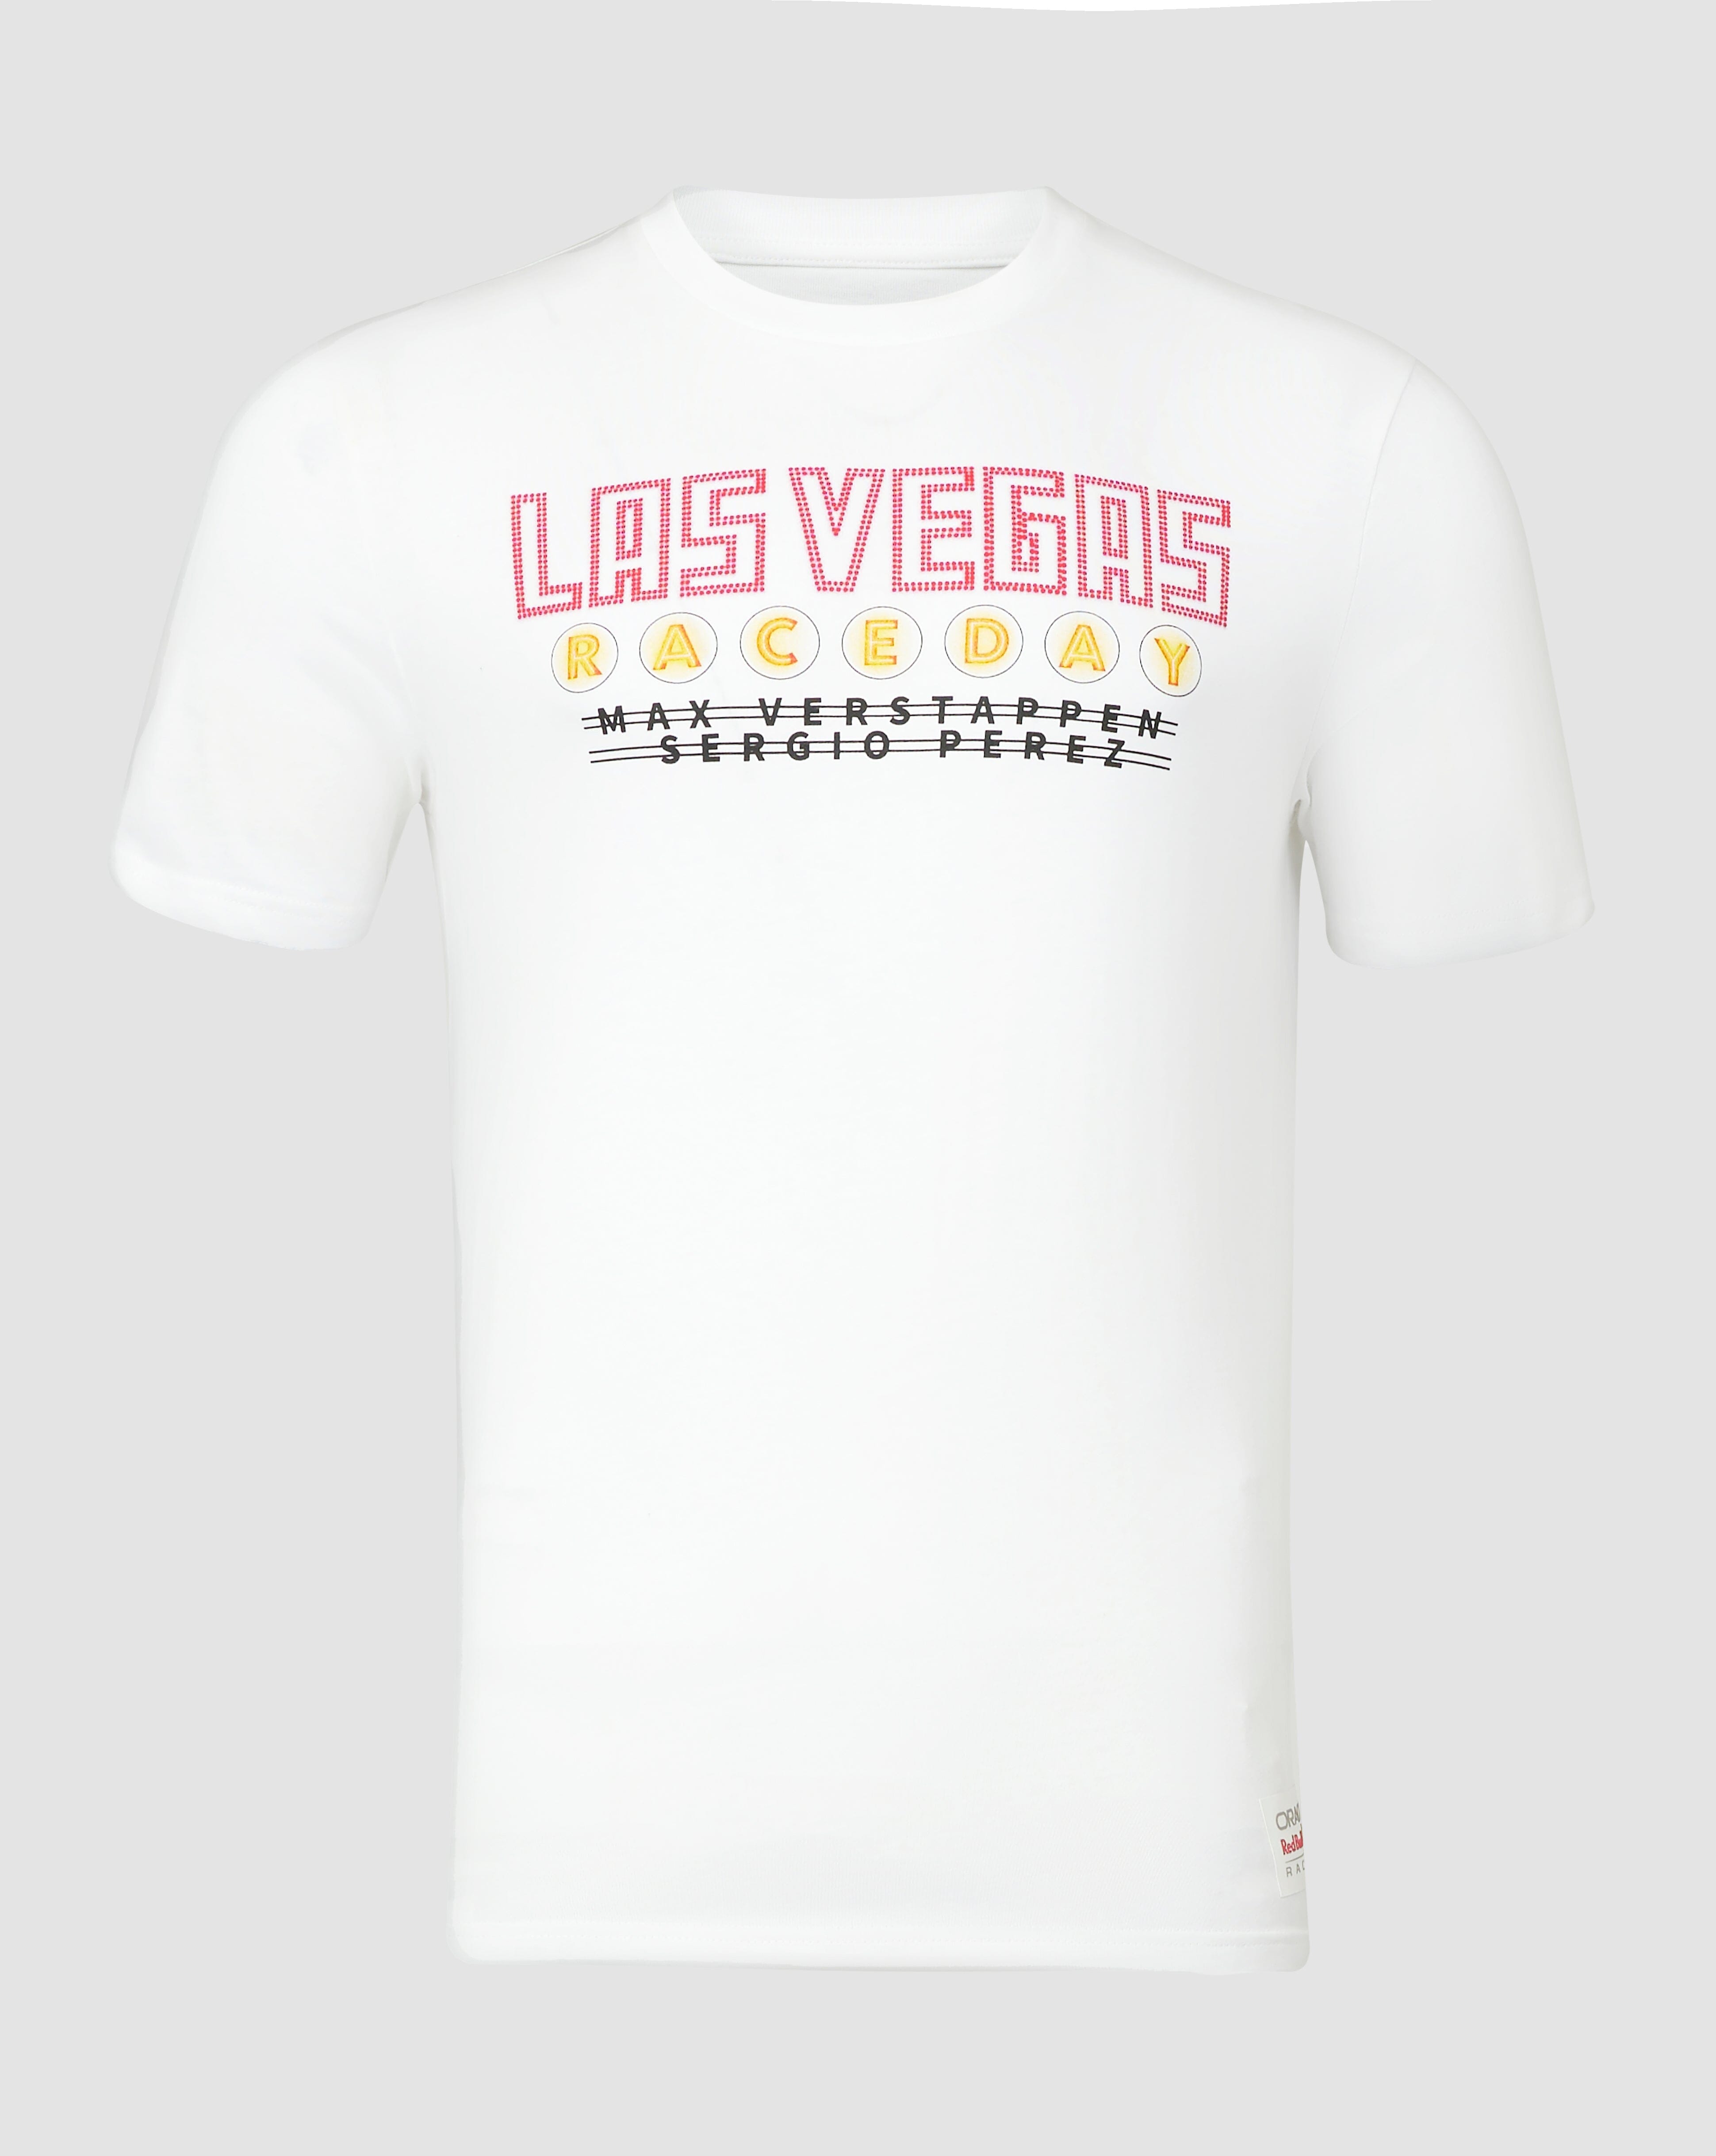 Red Bull - Las T-Shirt Edition F1 Vegas GP Racing Special White